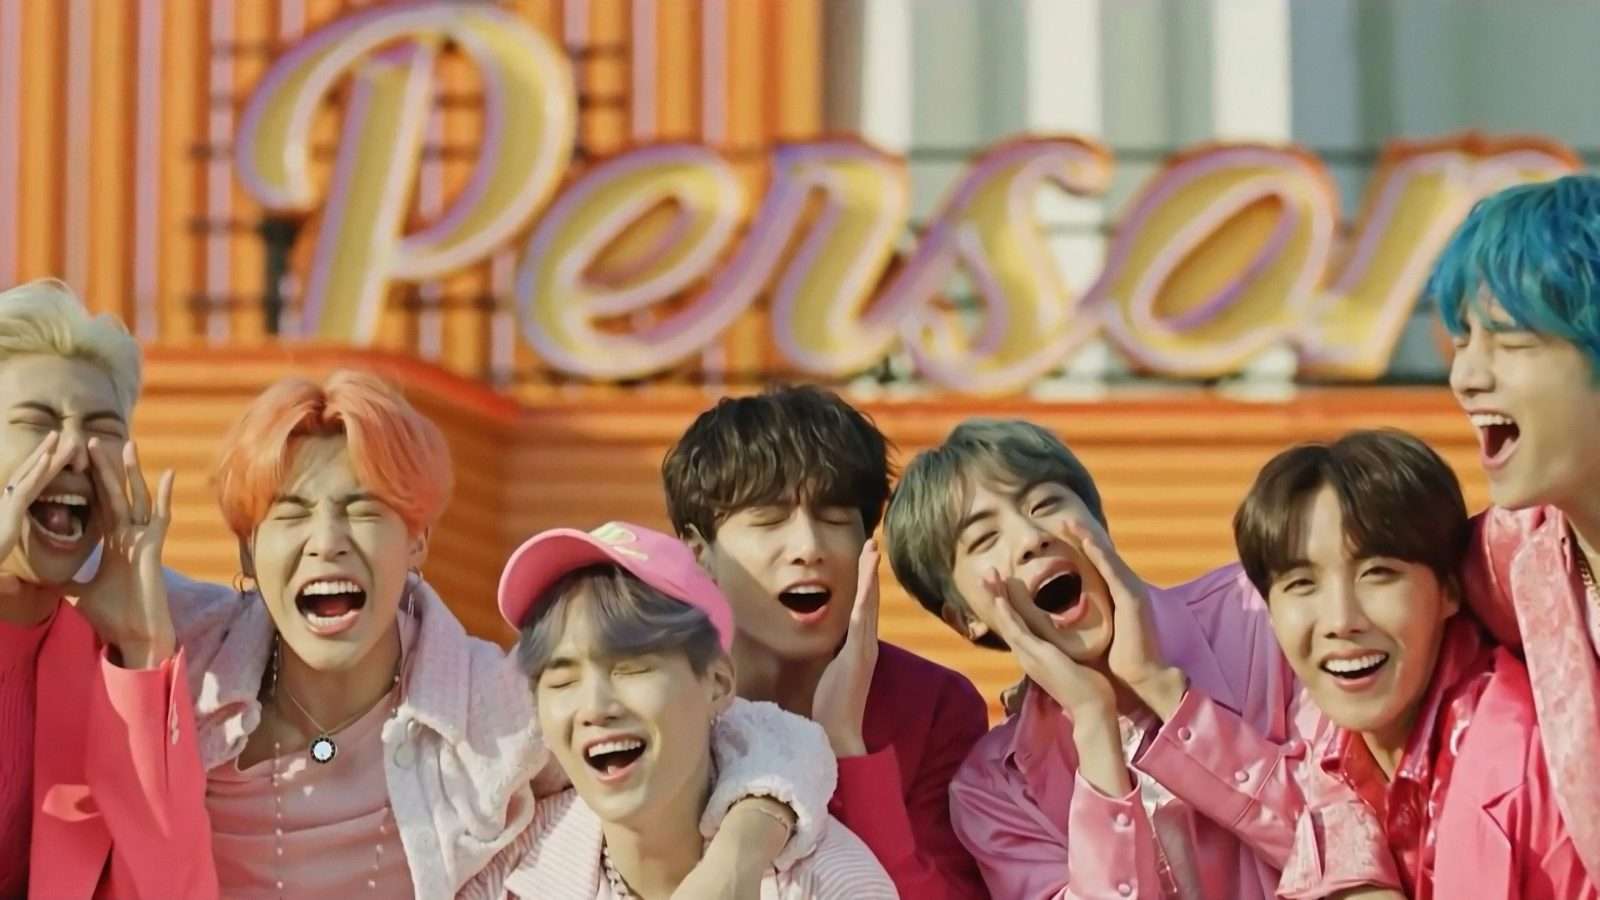 BTs in their boy with luv music video